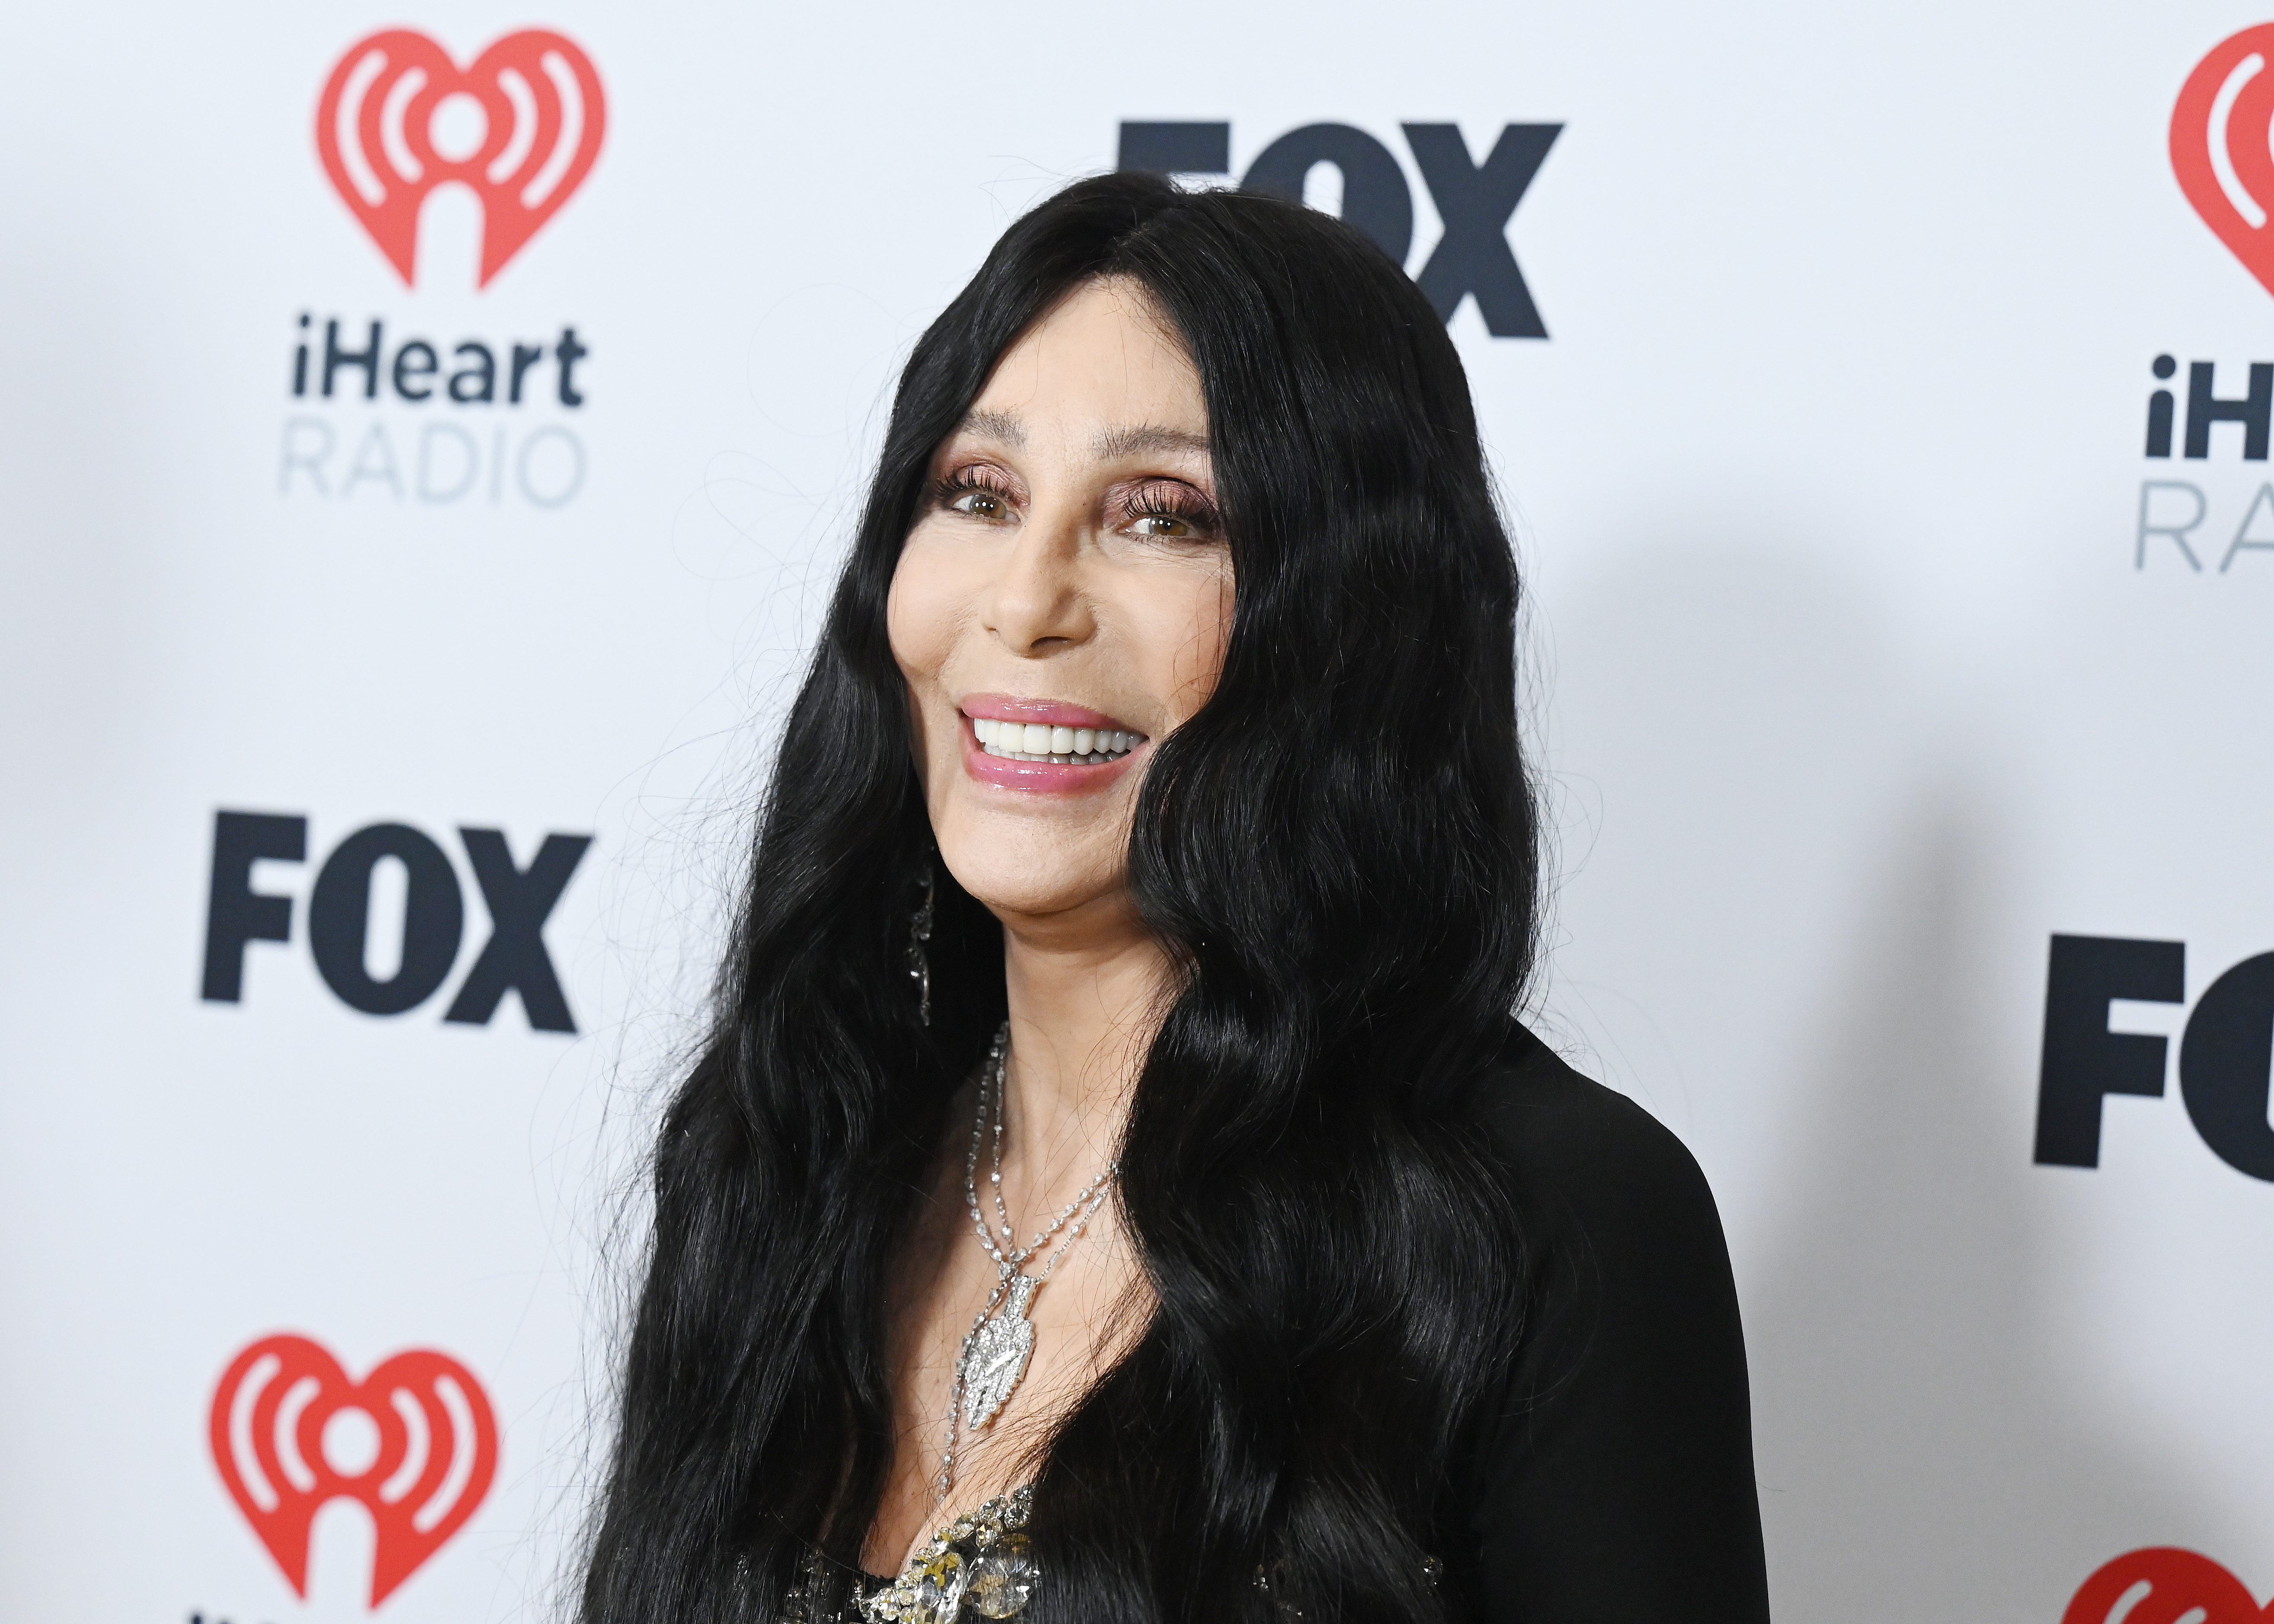 Cher is at the Dolby Theatre in Los Angeles, California